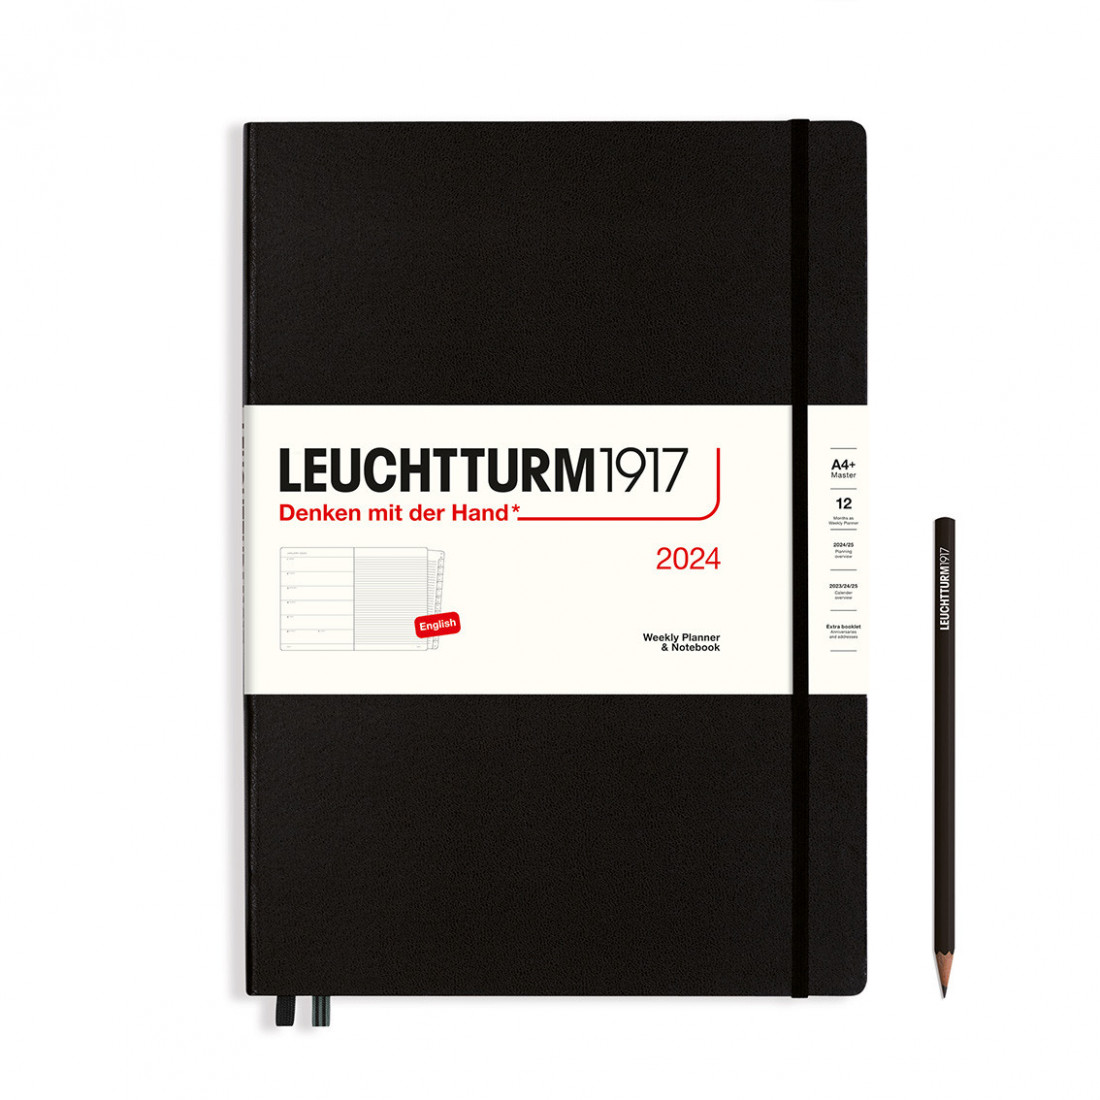 Leuchtturm 1917 Weekly Planner and Notebook 2024 Black Master A4 Plus Hard Cover